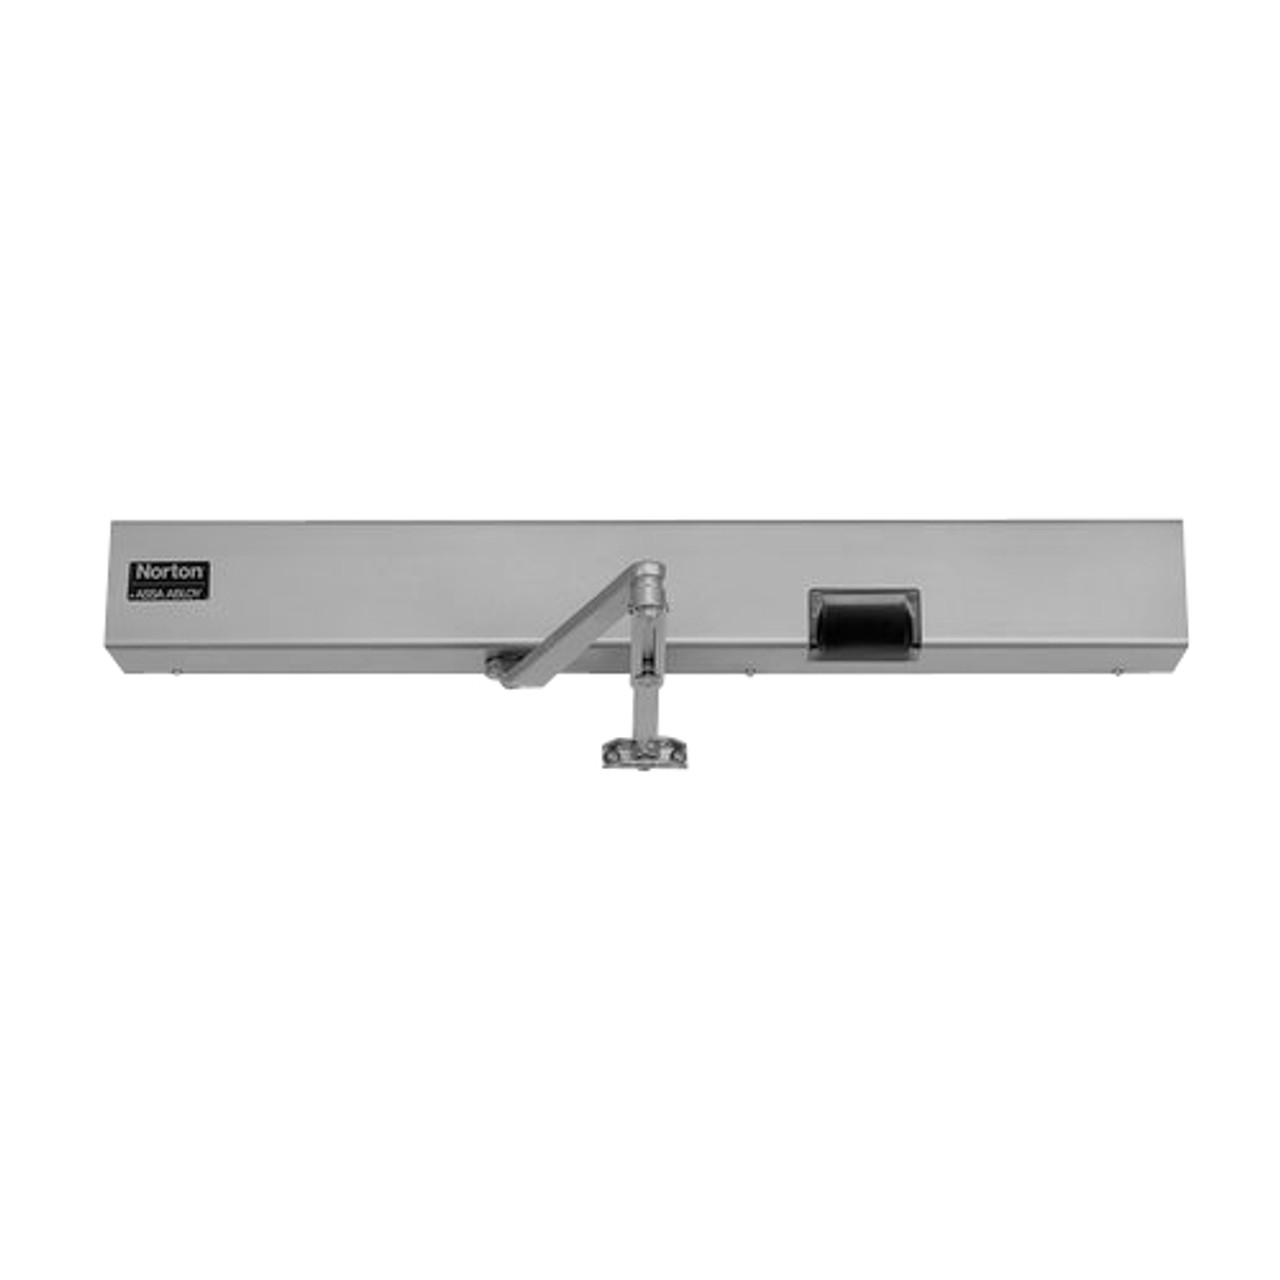 7123SZ-LH-120VAC-689 Norton 7100SZ Series Safe Zone Multi-Point Closer/Holder with Motion Sensor and Push Side Double Lever 11 inch Main Arm in Aluminum Finish